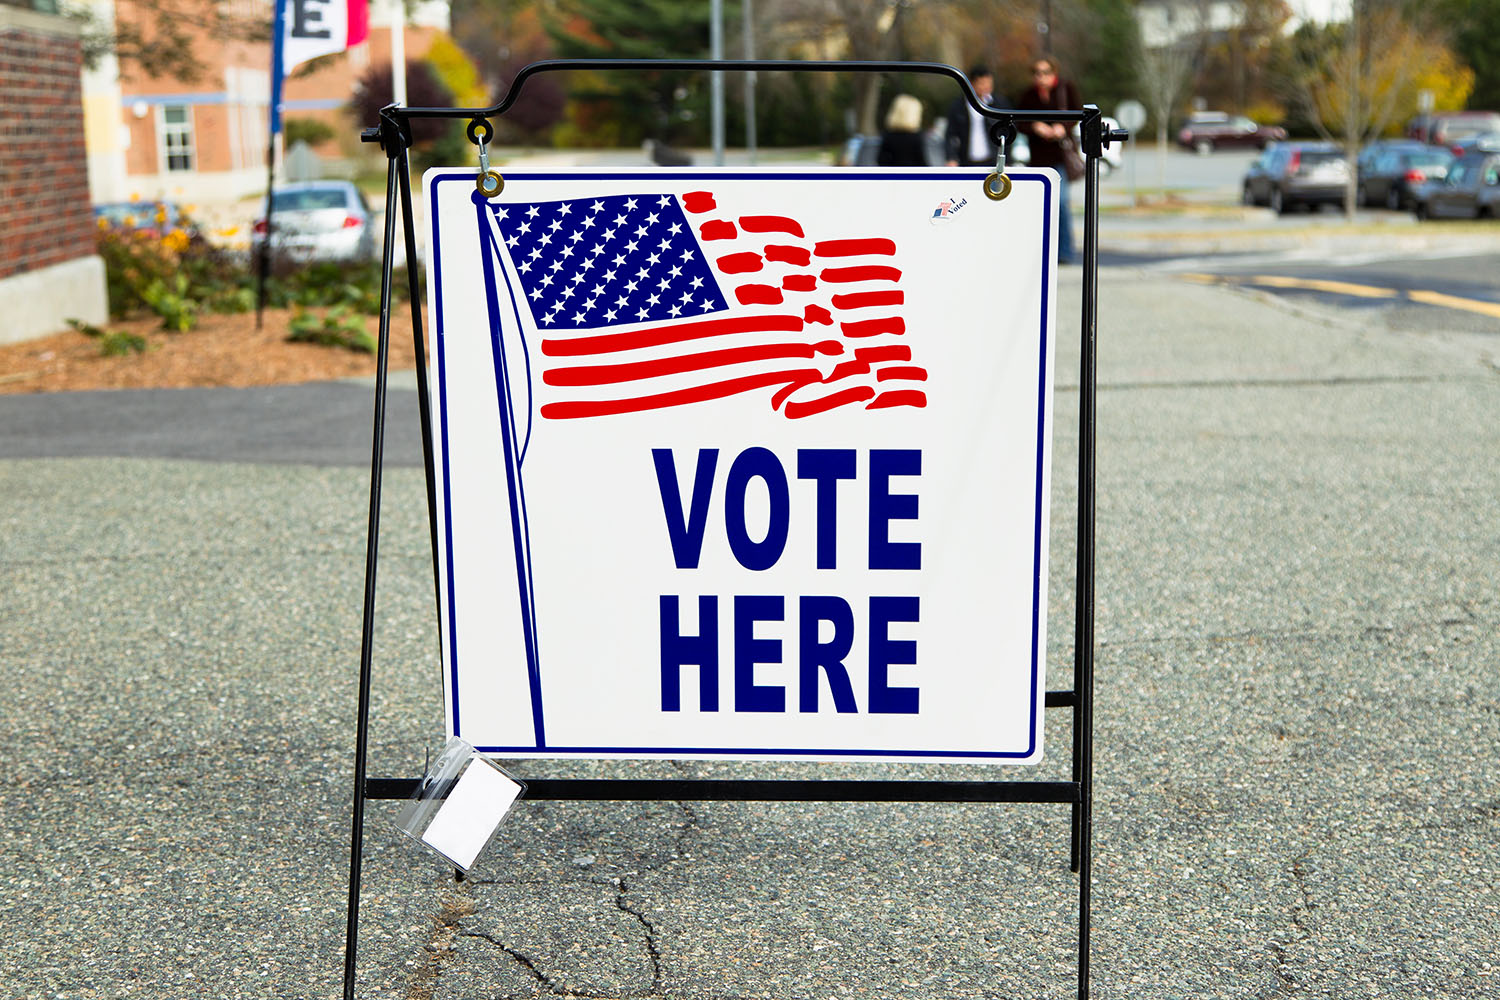 A Vote Here sign is set up in a parking lot